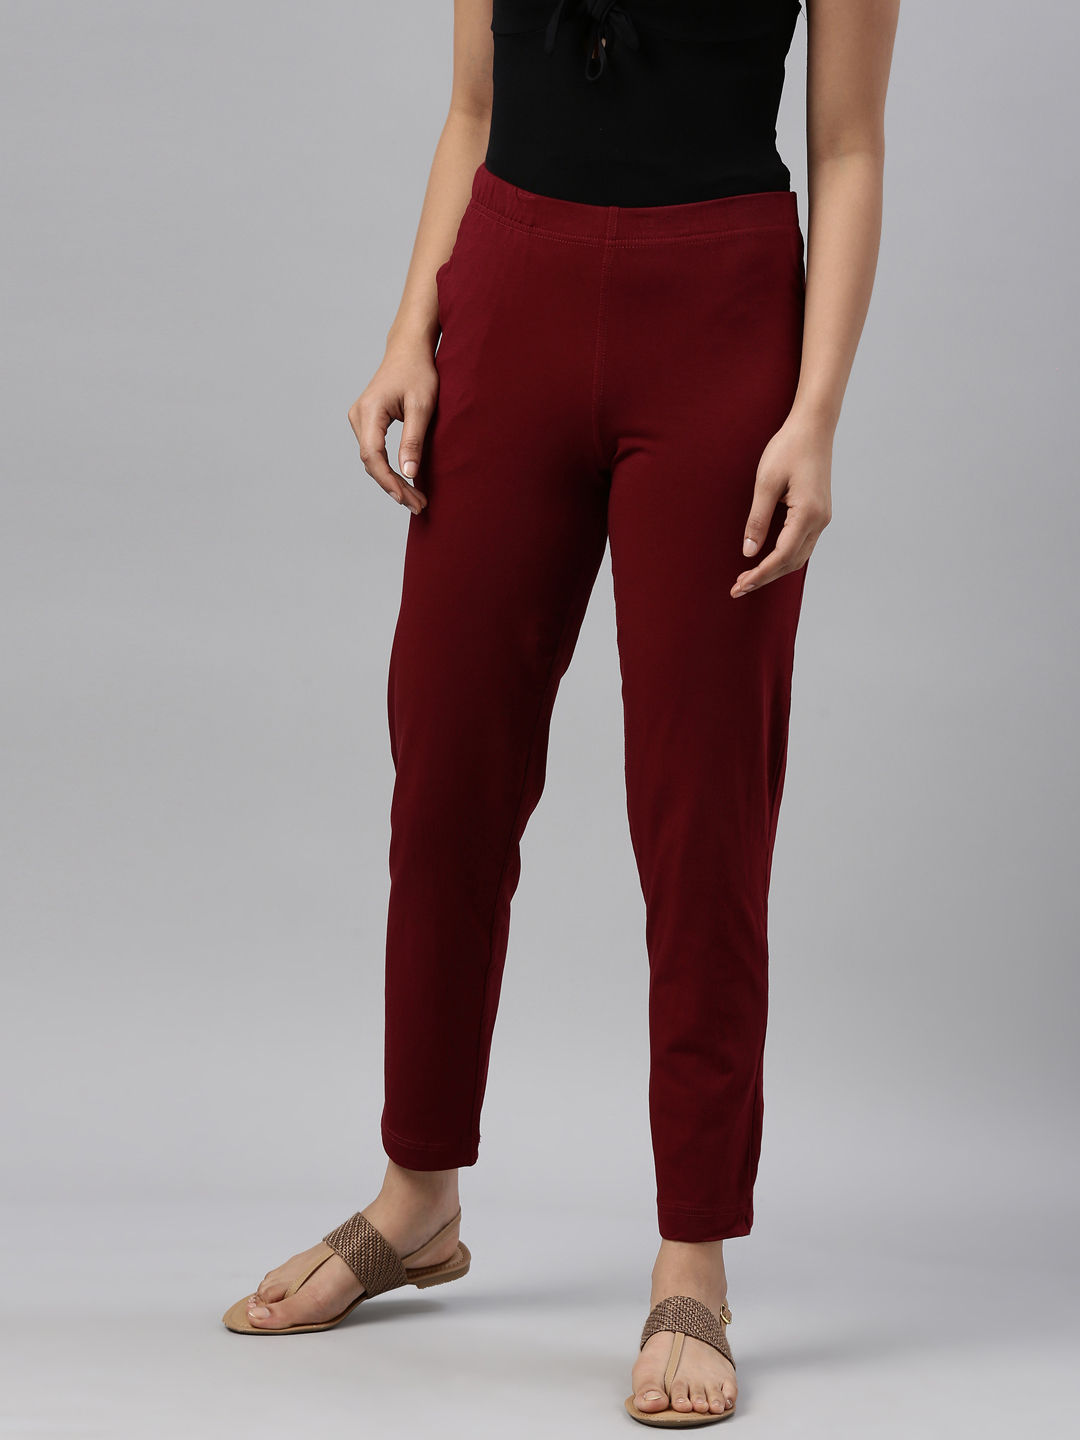 Buy GO COLORS Gold Womens Shimmer Pants | Shoppers Stop